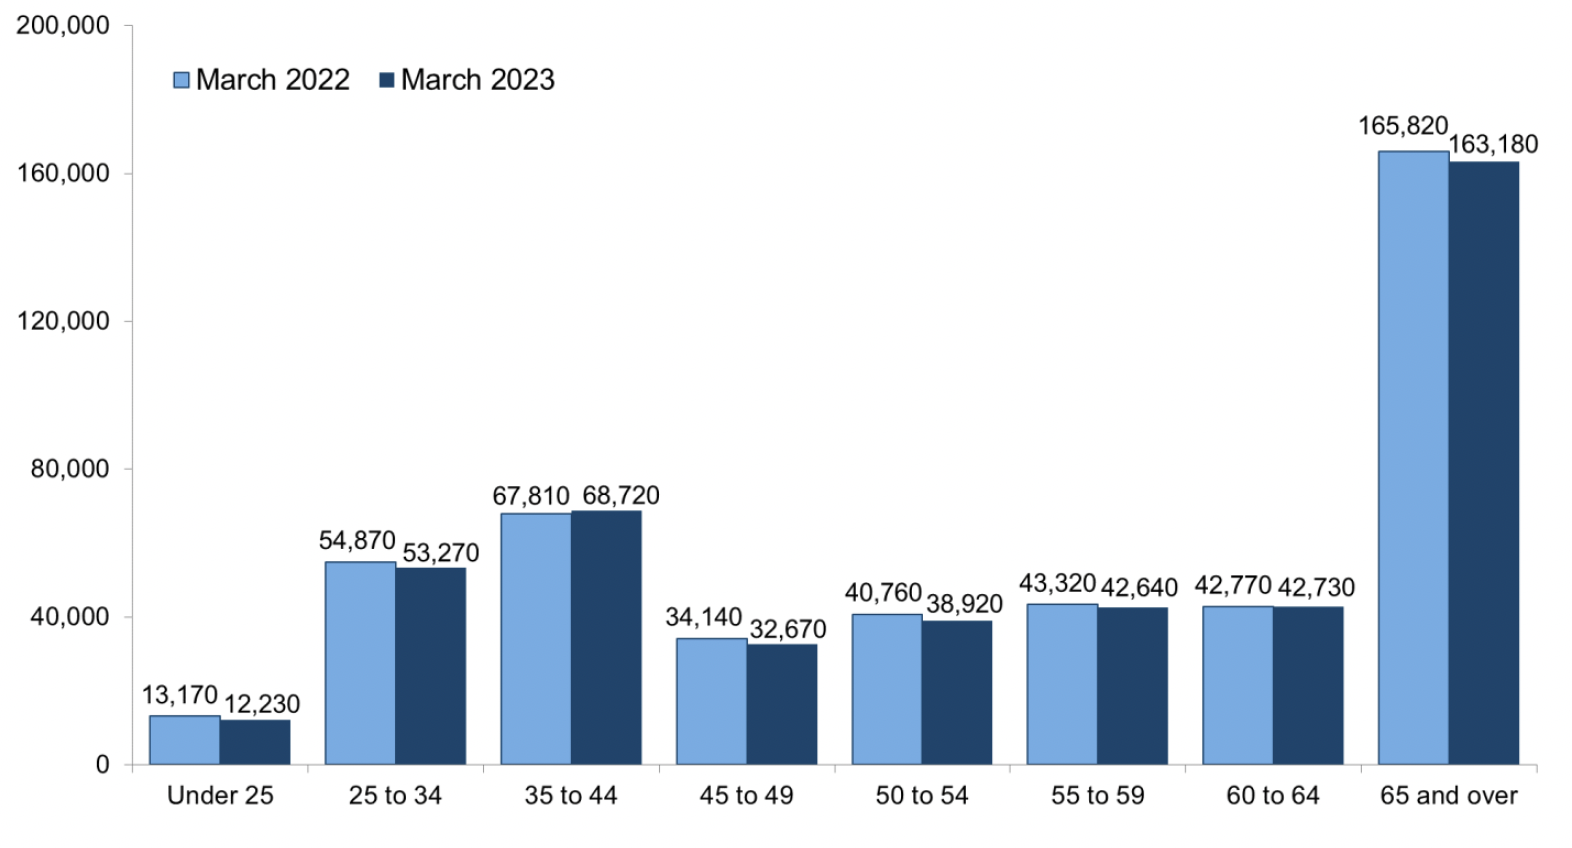 Bar chart comparing CTR recipients by age group, March 2022 and March 2023